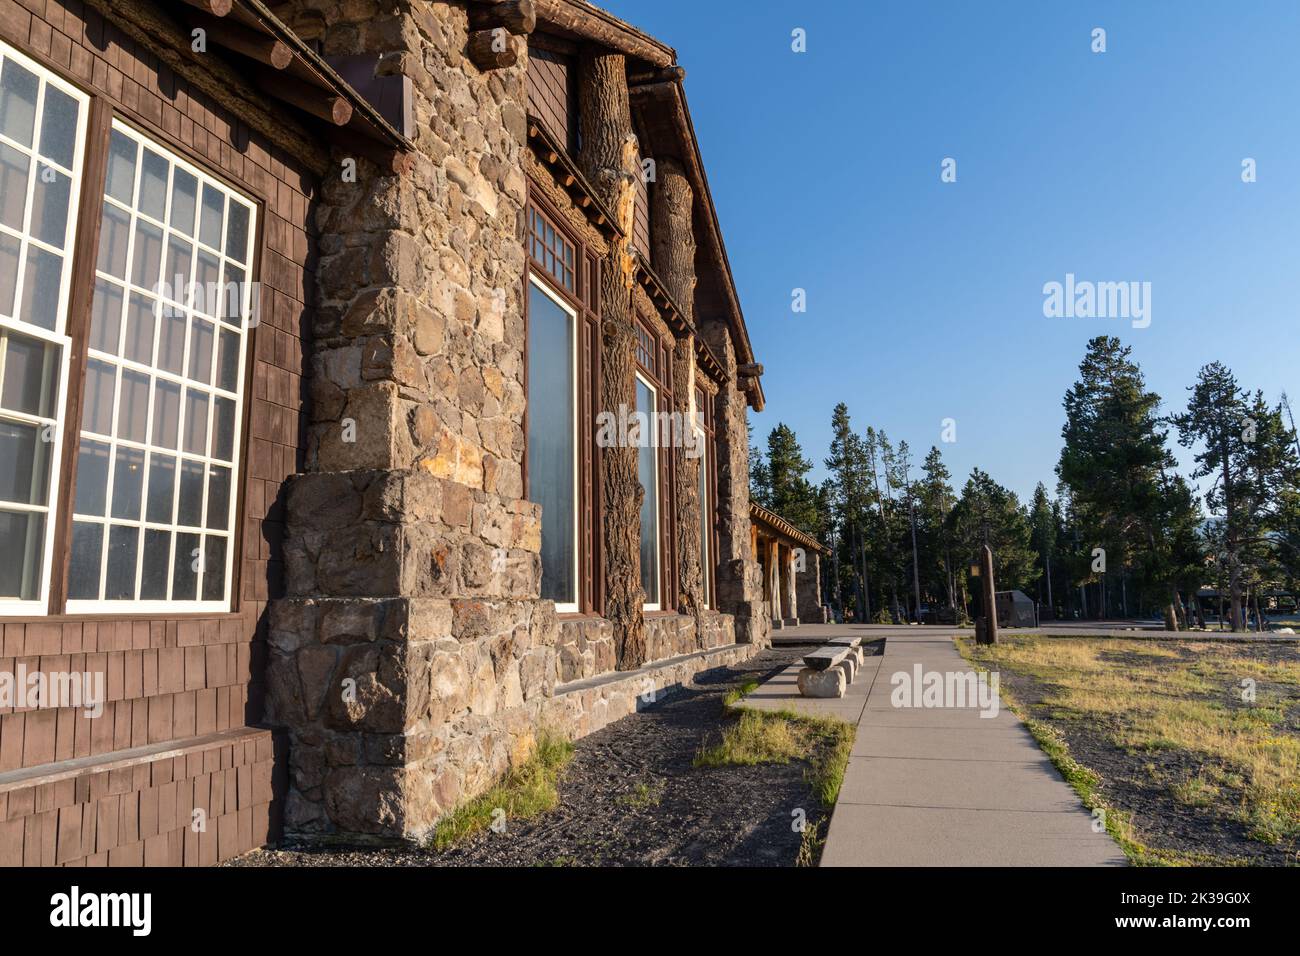 Wyoming, USA - July 19, 2022: Outside the historic Old Faithful Lodge hotel in Yellowstone National Park during summer Stock Photo